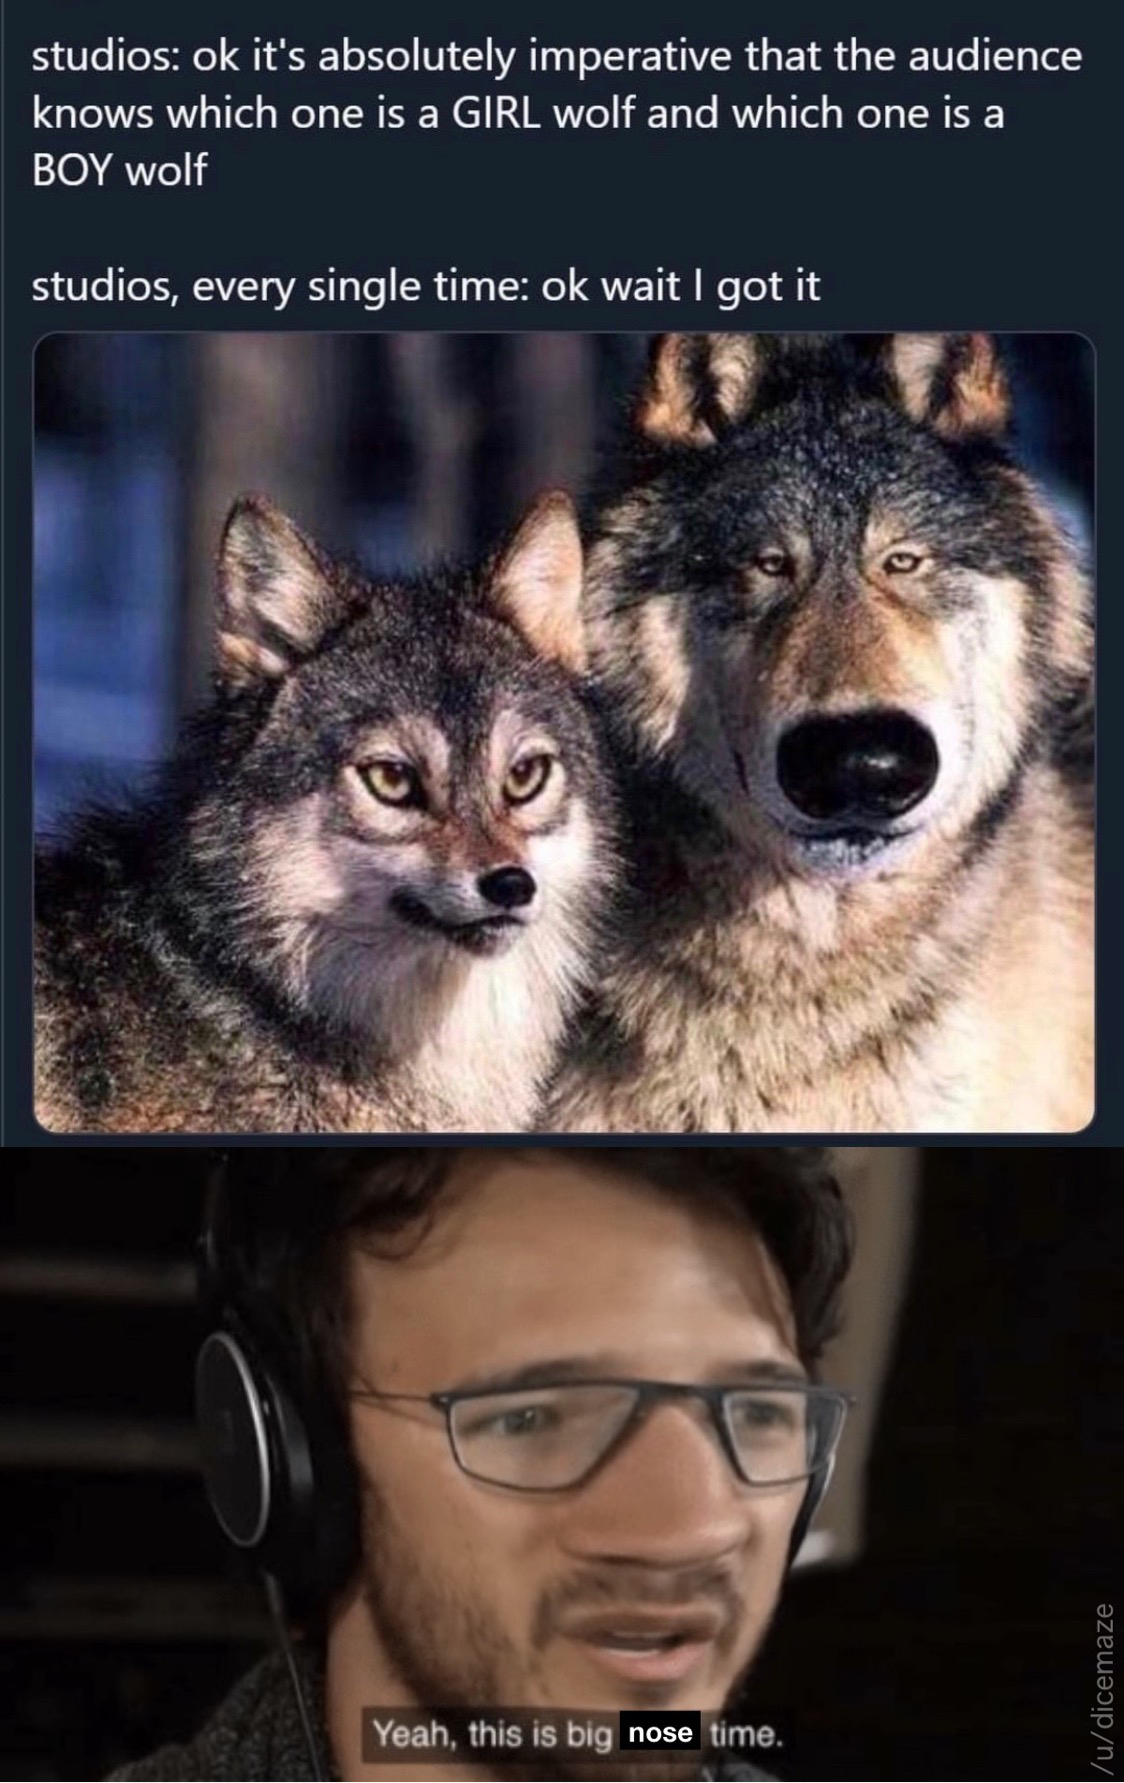 grey wolf male and female - studios ok it's absolutely imperative that the audience knows which one is a Girl Wolf and which one is a Boy wolf studios, every single time ok wait I got it Wocenate Yeah, this is big nose time.